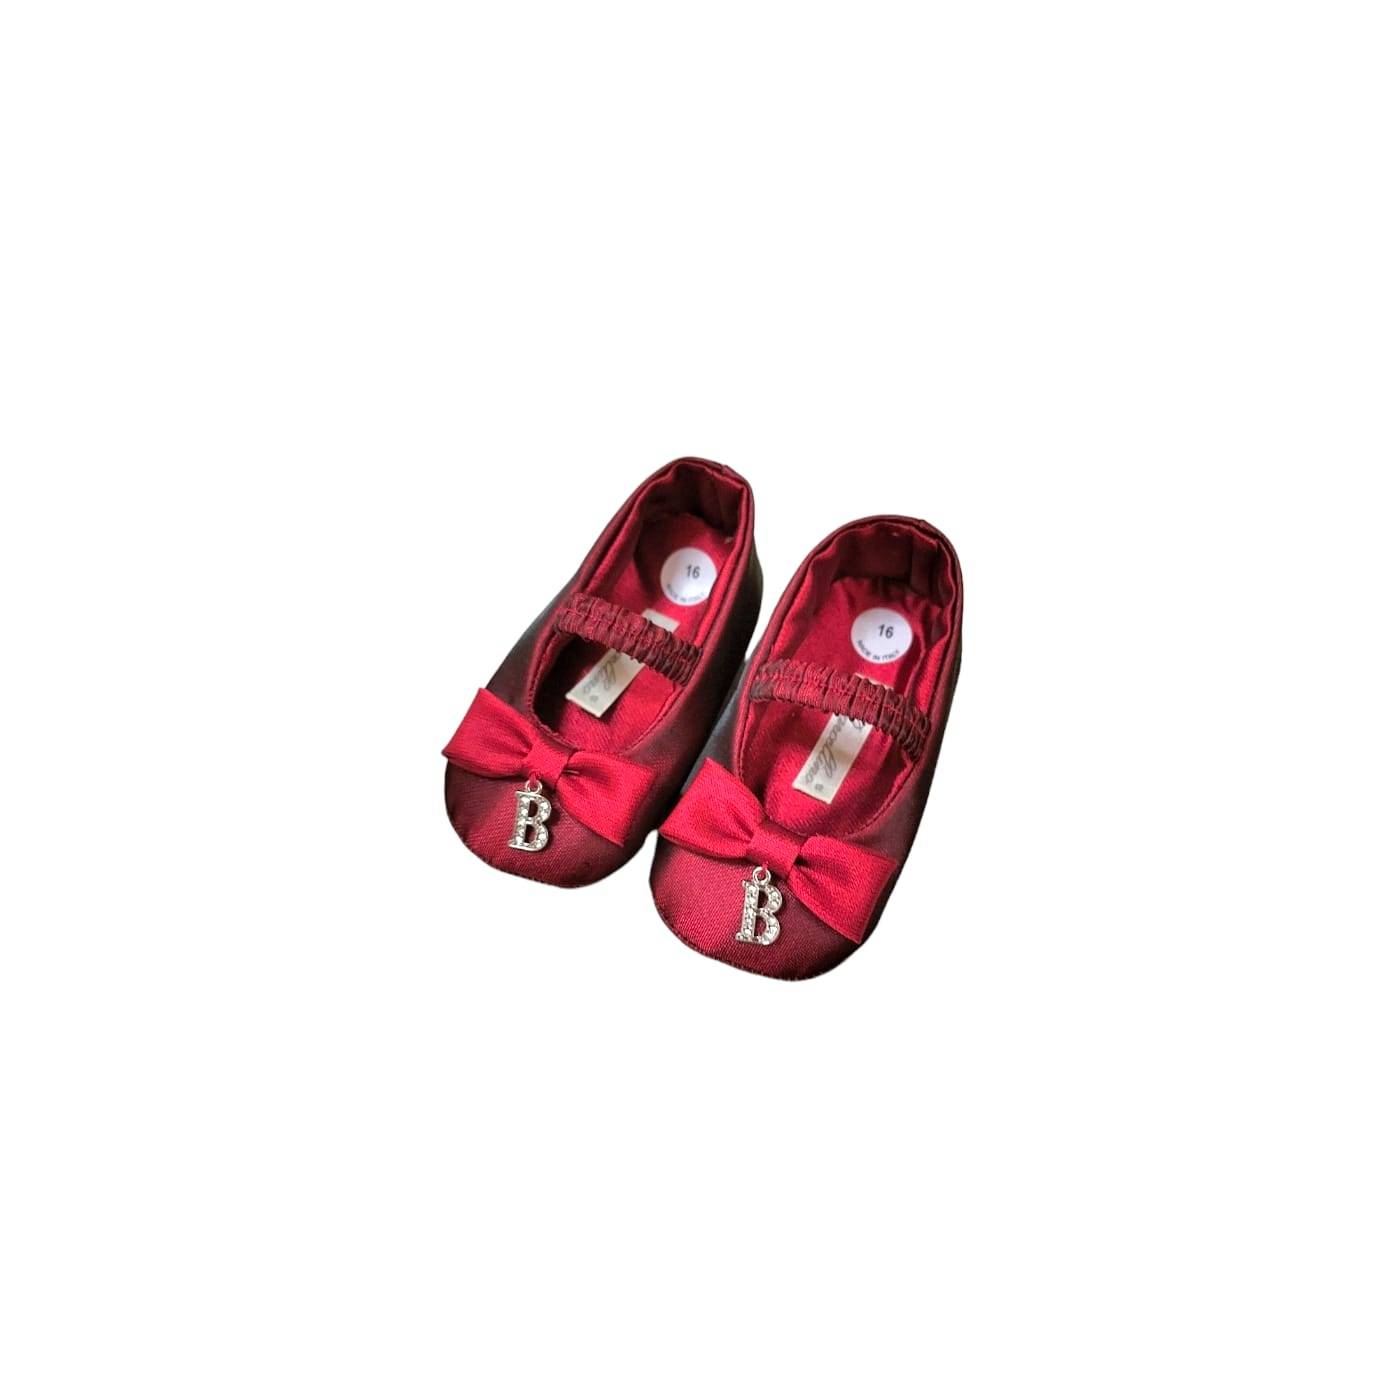 Elegant newborn baby shoes Barcellino size 16 red with bow